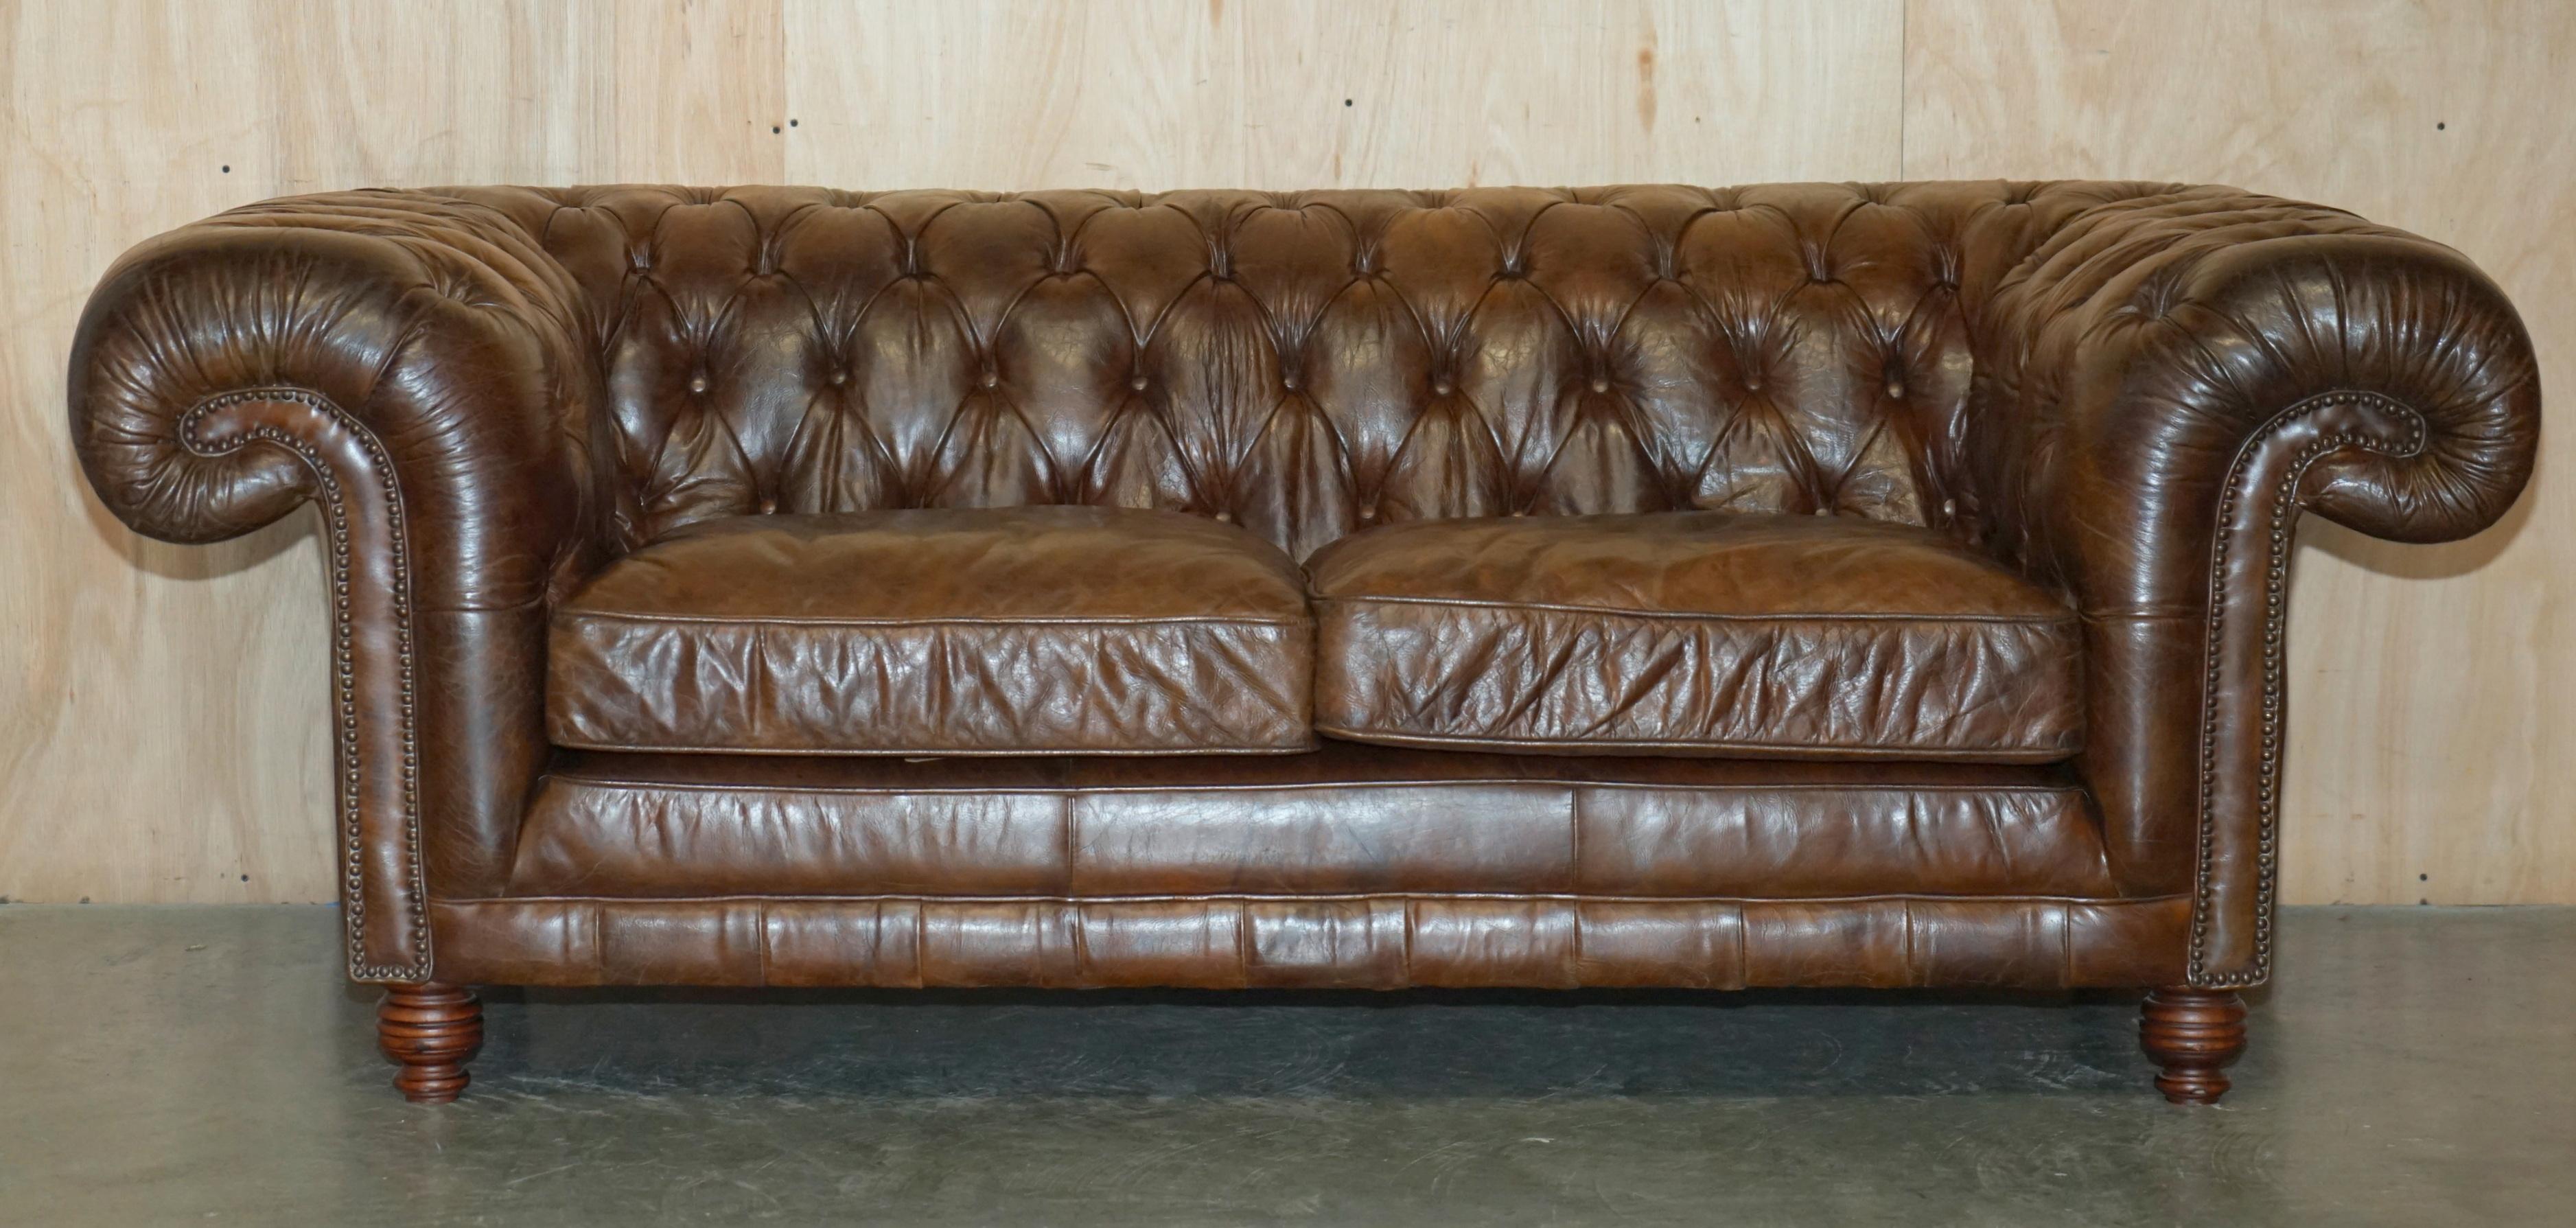 1 von 2 TIMOTHY OULTON HERiTAGE BROWN VINTAGE LEATHER CHESTERFIELD HALO SOFAS im Angebot 14